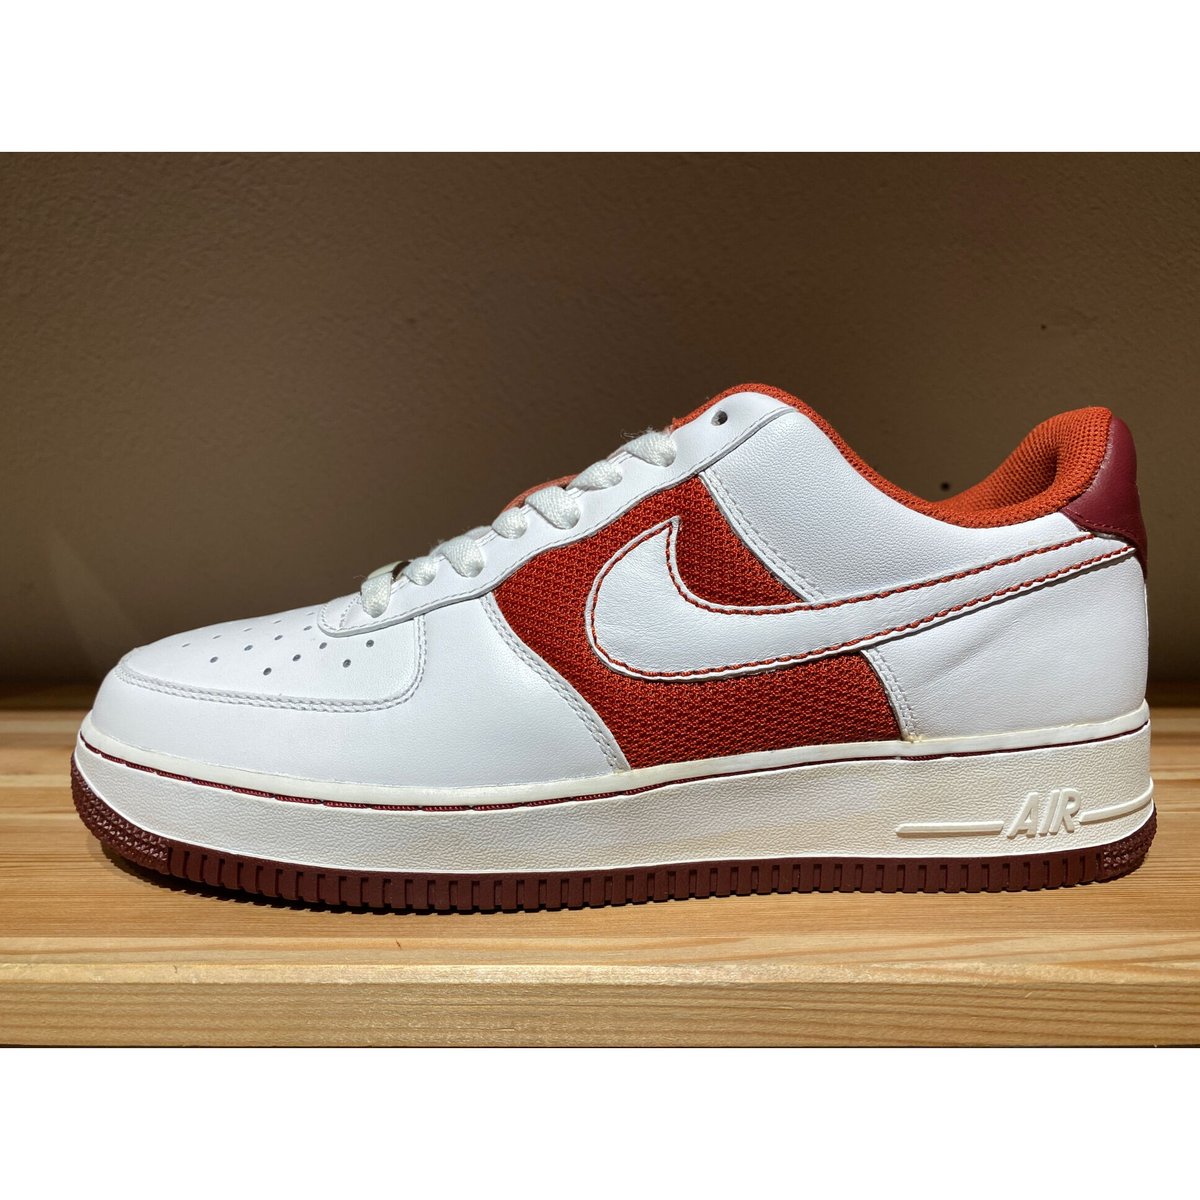 ☆FORCE 1 25周年・BALTIMOREモデル - NIKE AIR FORCE 1 '...